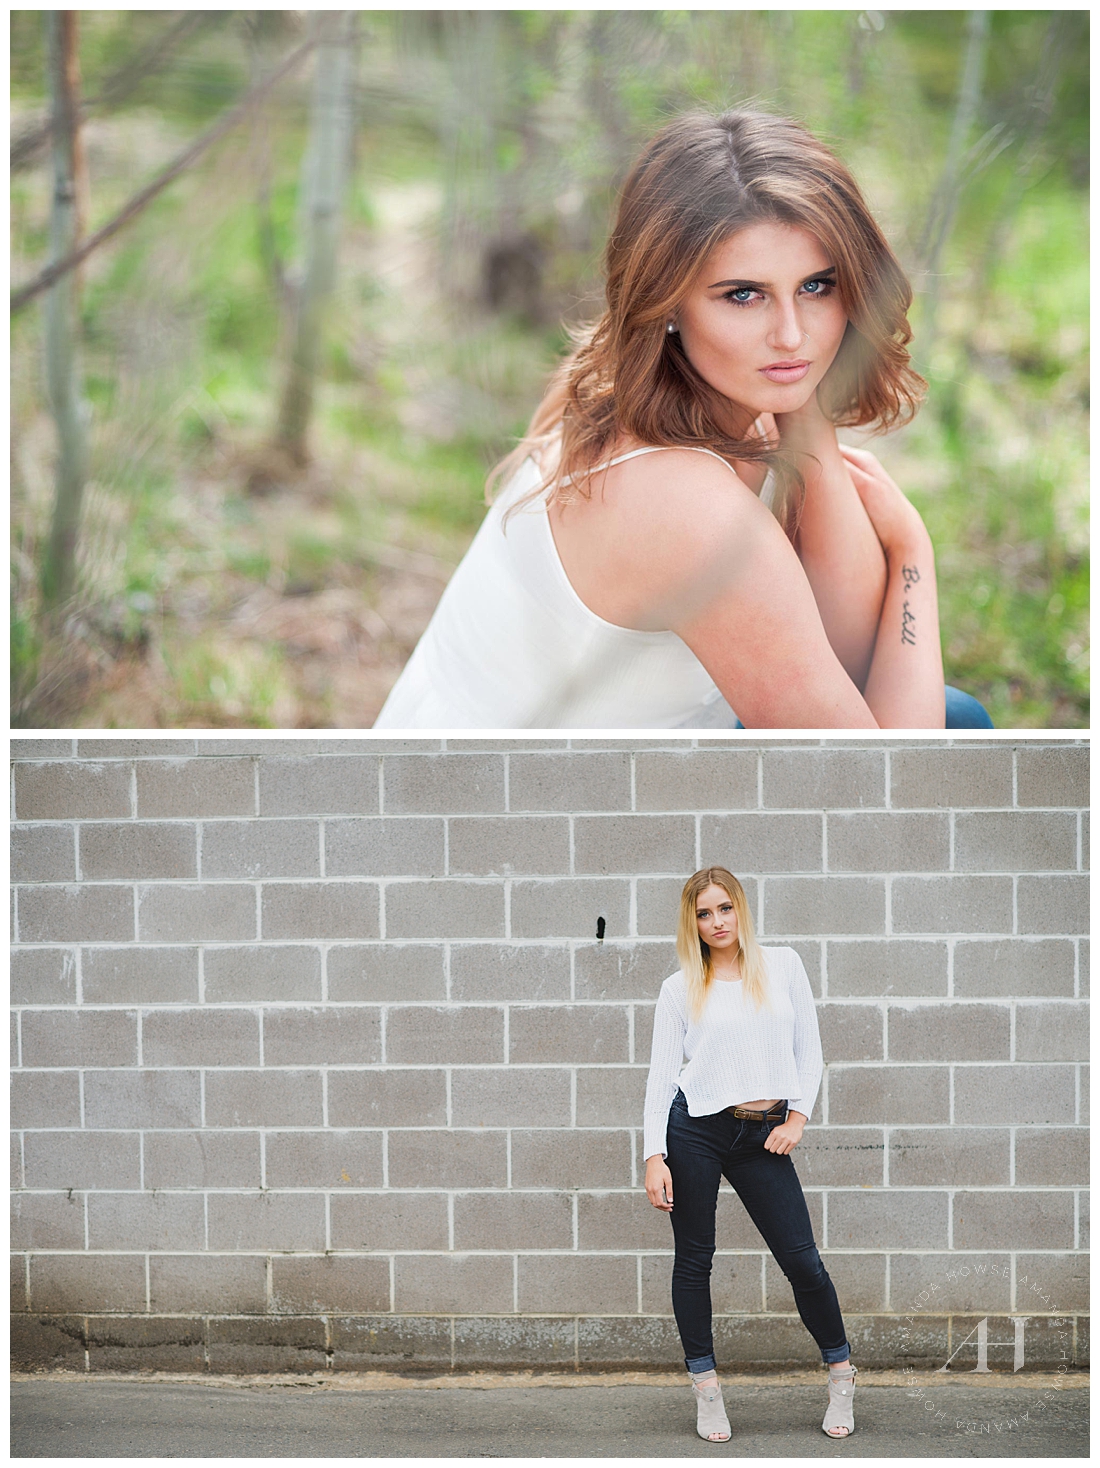 Fun Styled Senior Portraits | Senior Photography Workshops and Continuing Your Education as a Senior Photographer | Photographed by Tacoma Senior Photographer Amanda Howse